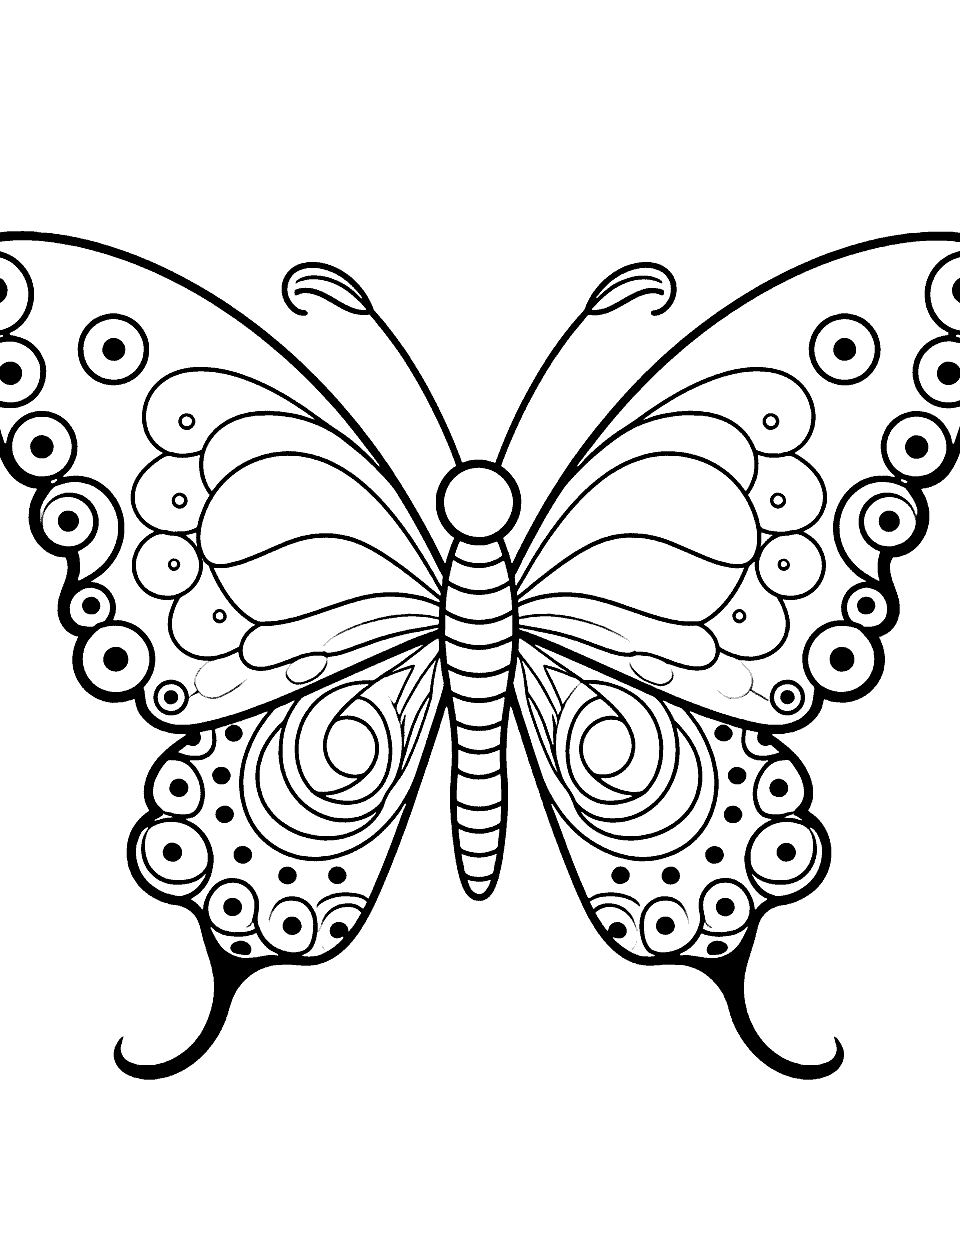 Butterfly With Intricate Patterns Cute Coloring Page - A butterfly with detailed patterns on its wings.